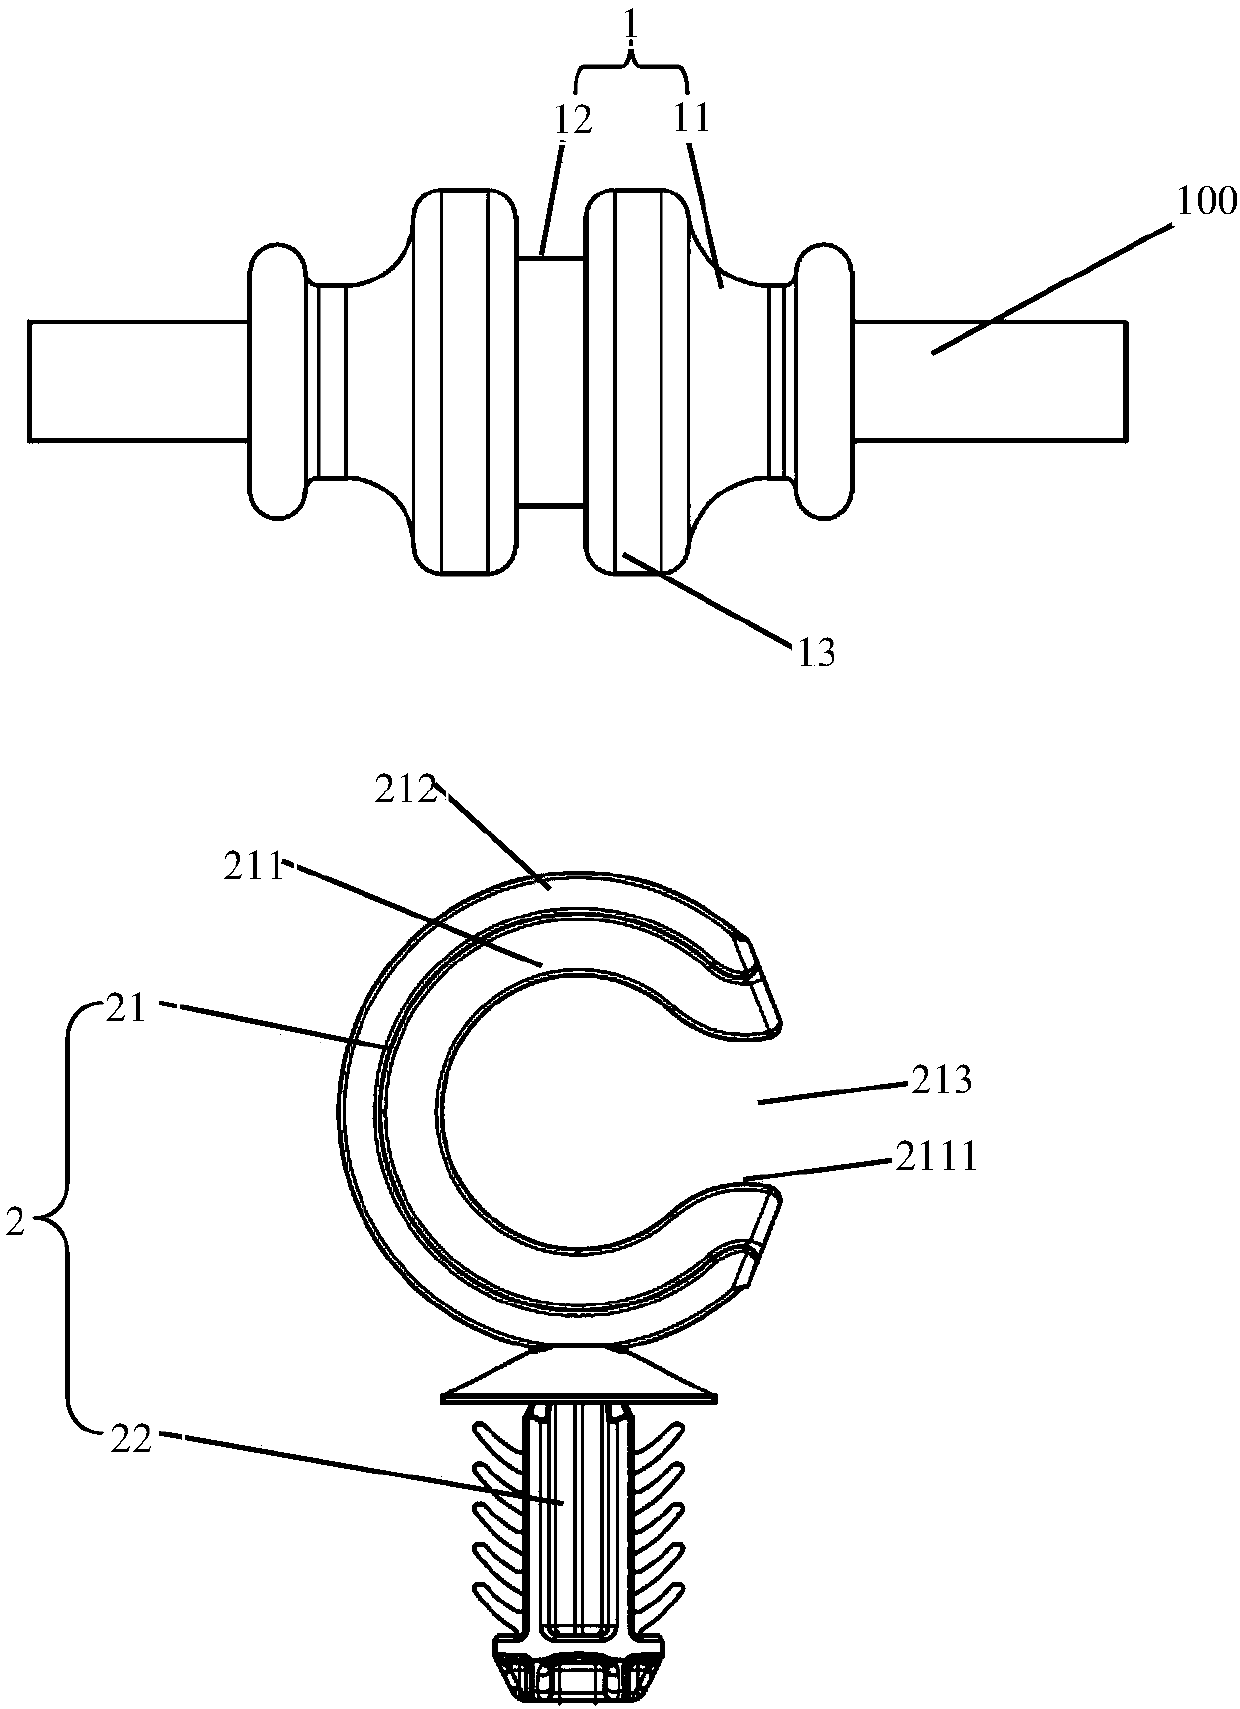 Fastening device used for fixing cable